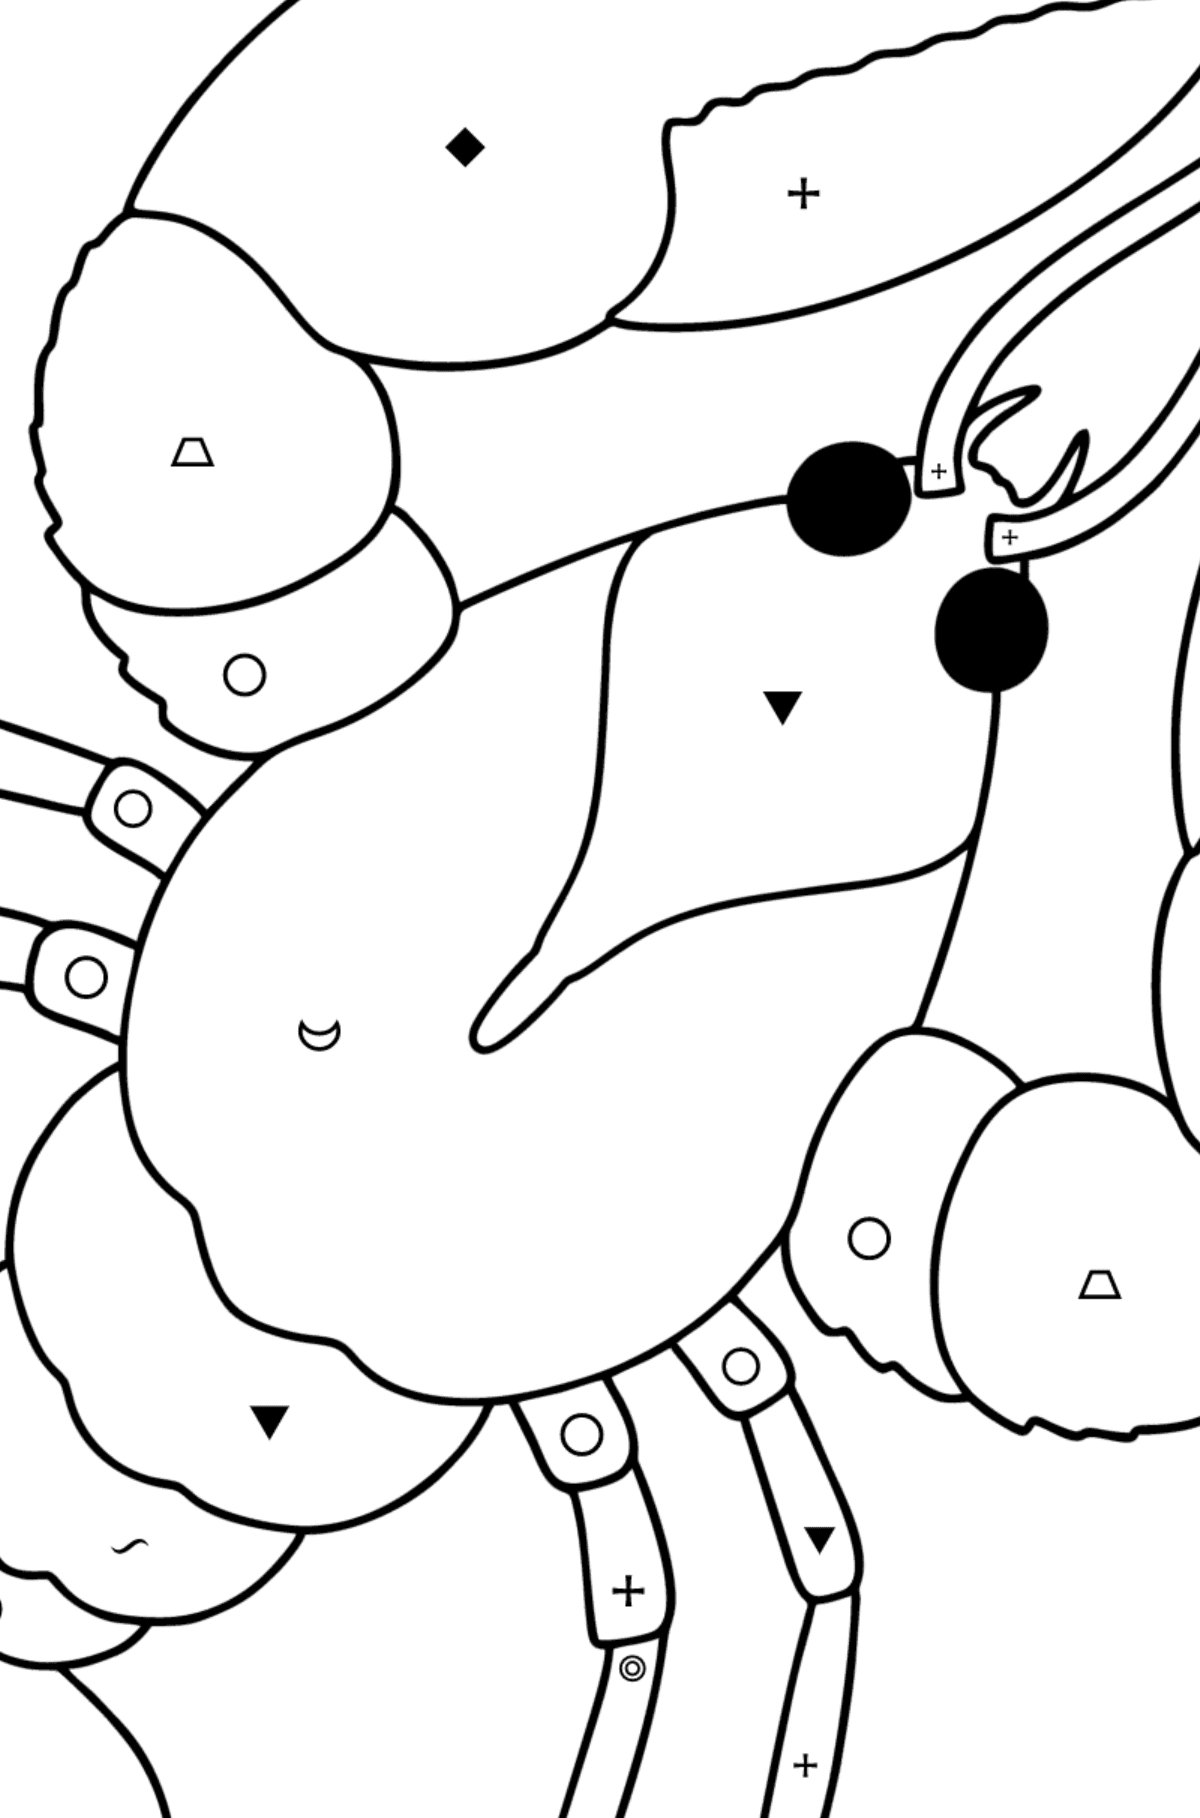 Lobster coloring page - Coloring by Symbols and Geometric Shapes for Kids